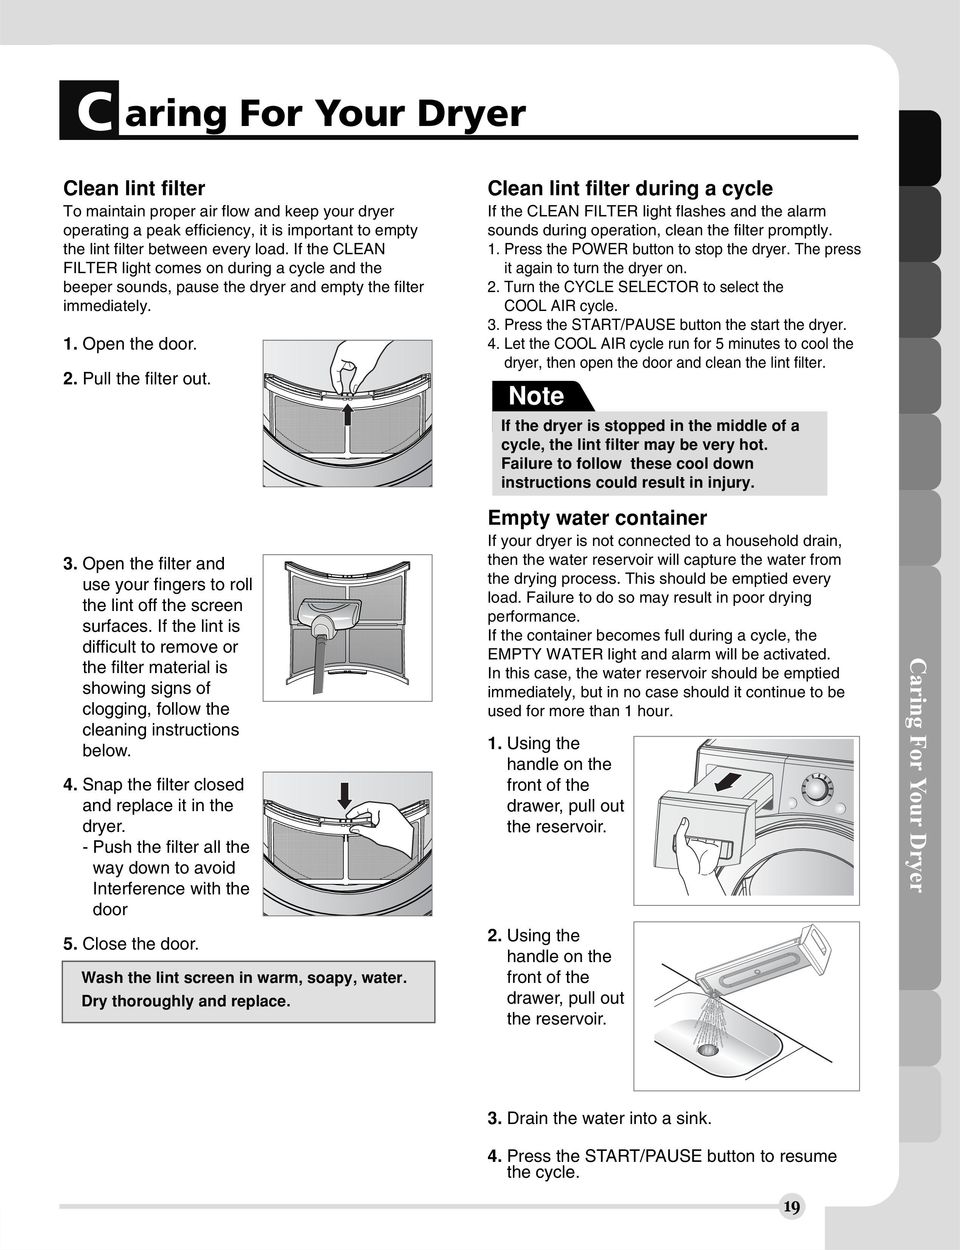 Note If the dryer is stopped in the middle of a cycle, the lint filter may be very hot. ailure to follow these cool down instructions could result in injury.